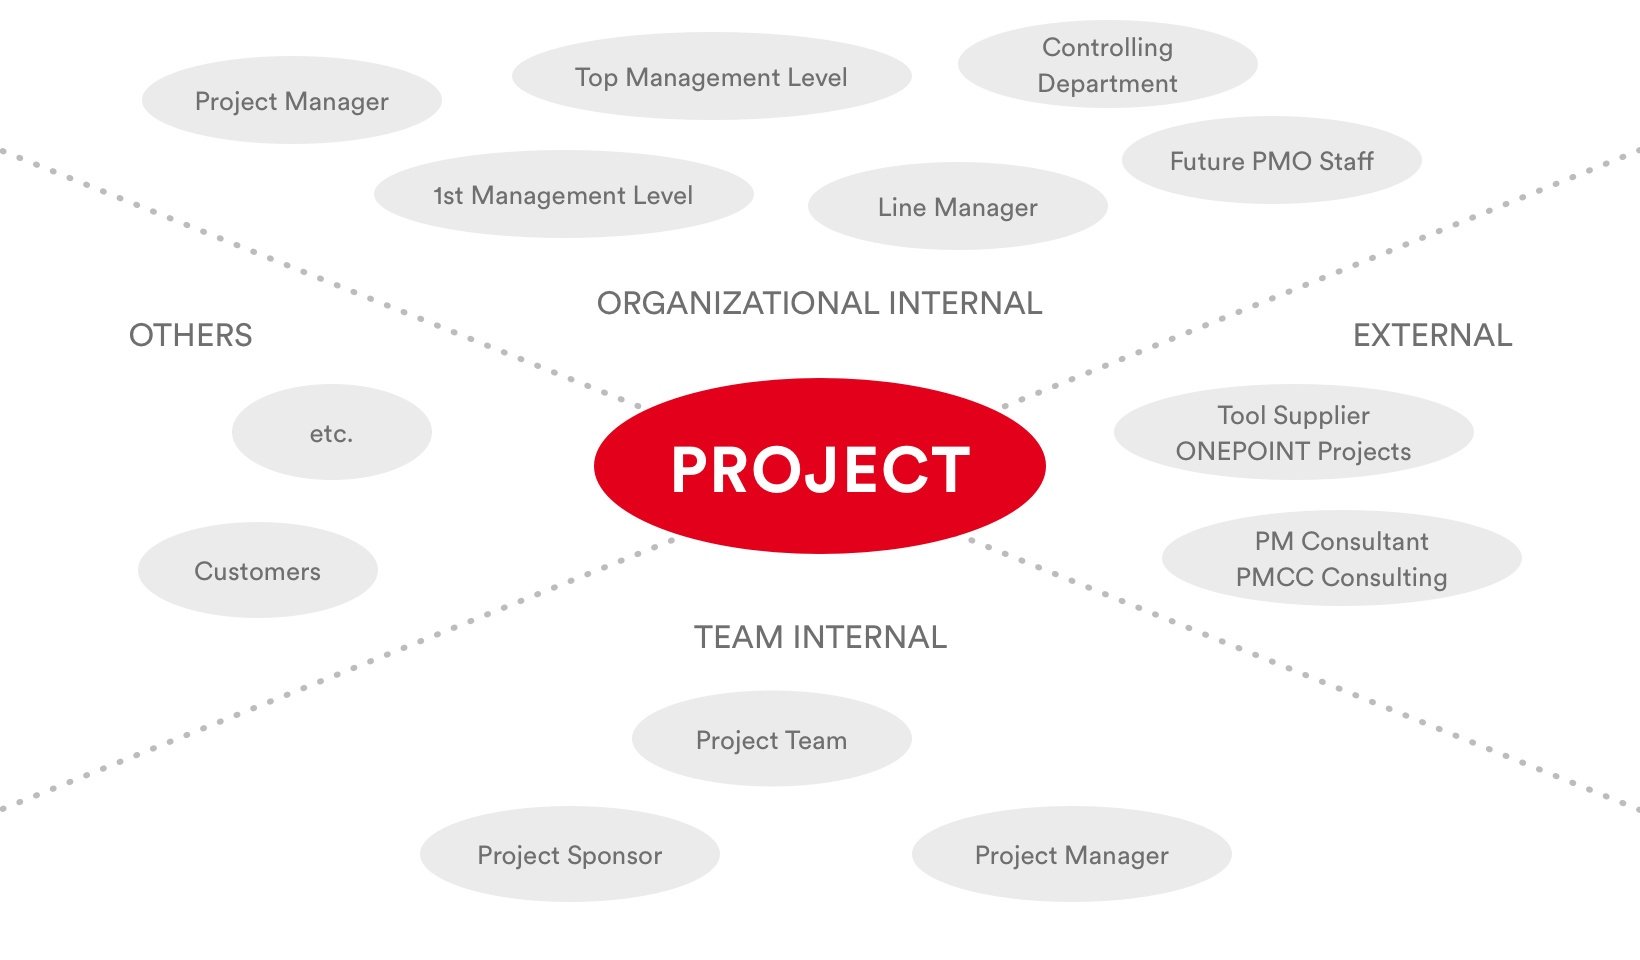 PMCC-An example stakeholder analysis for a PMO project